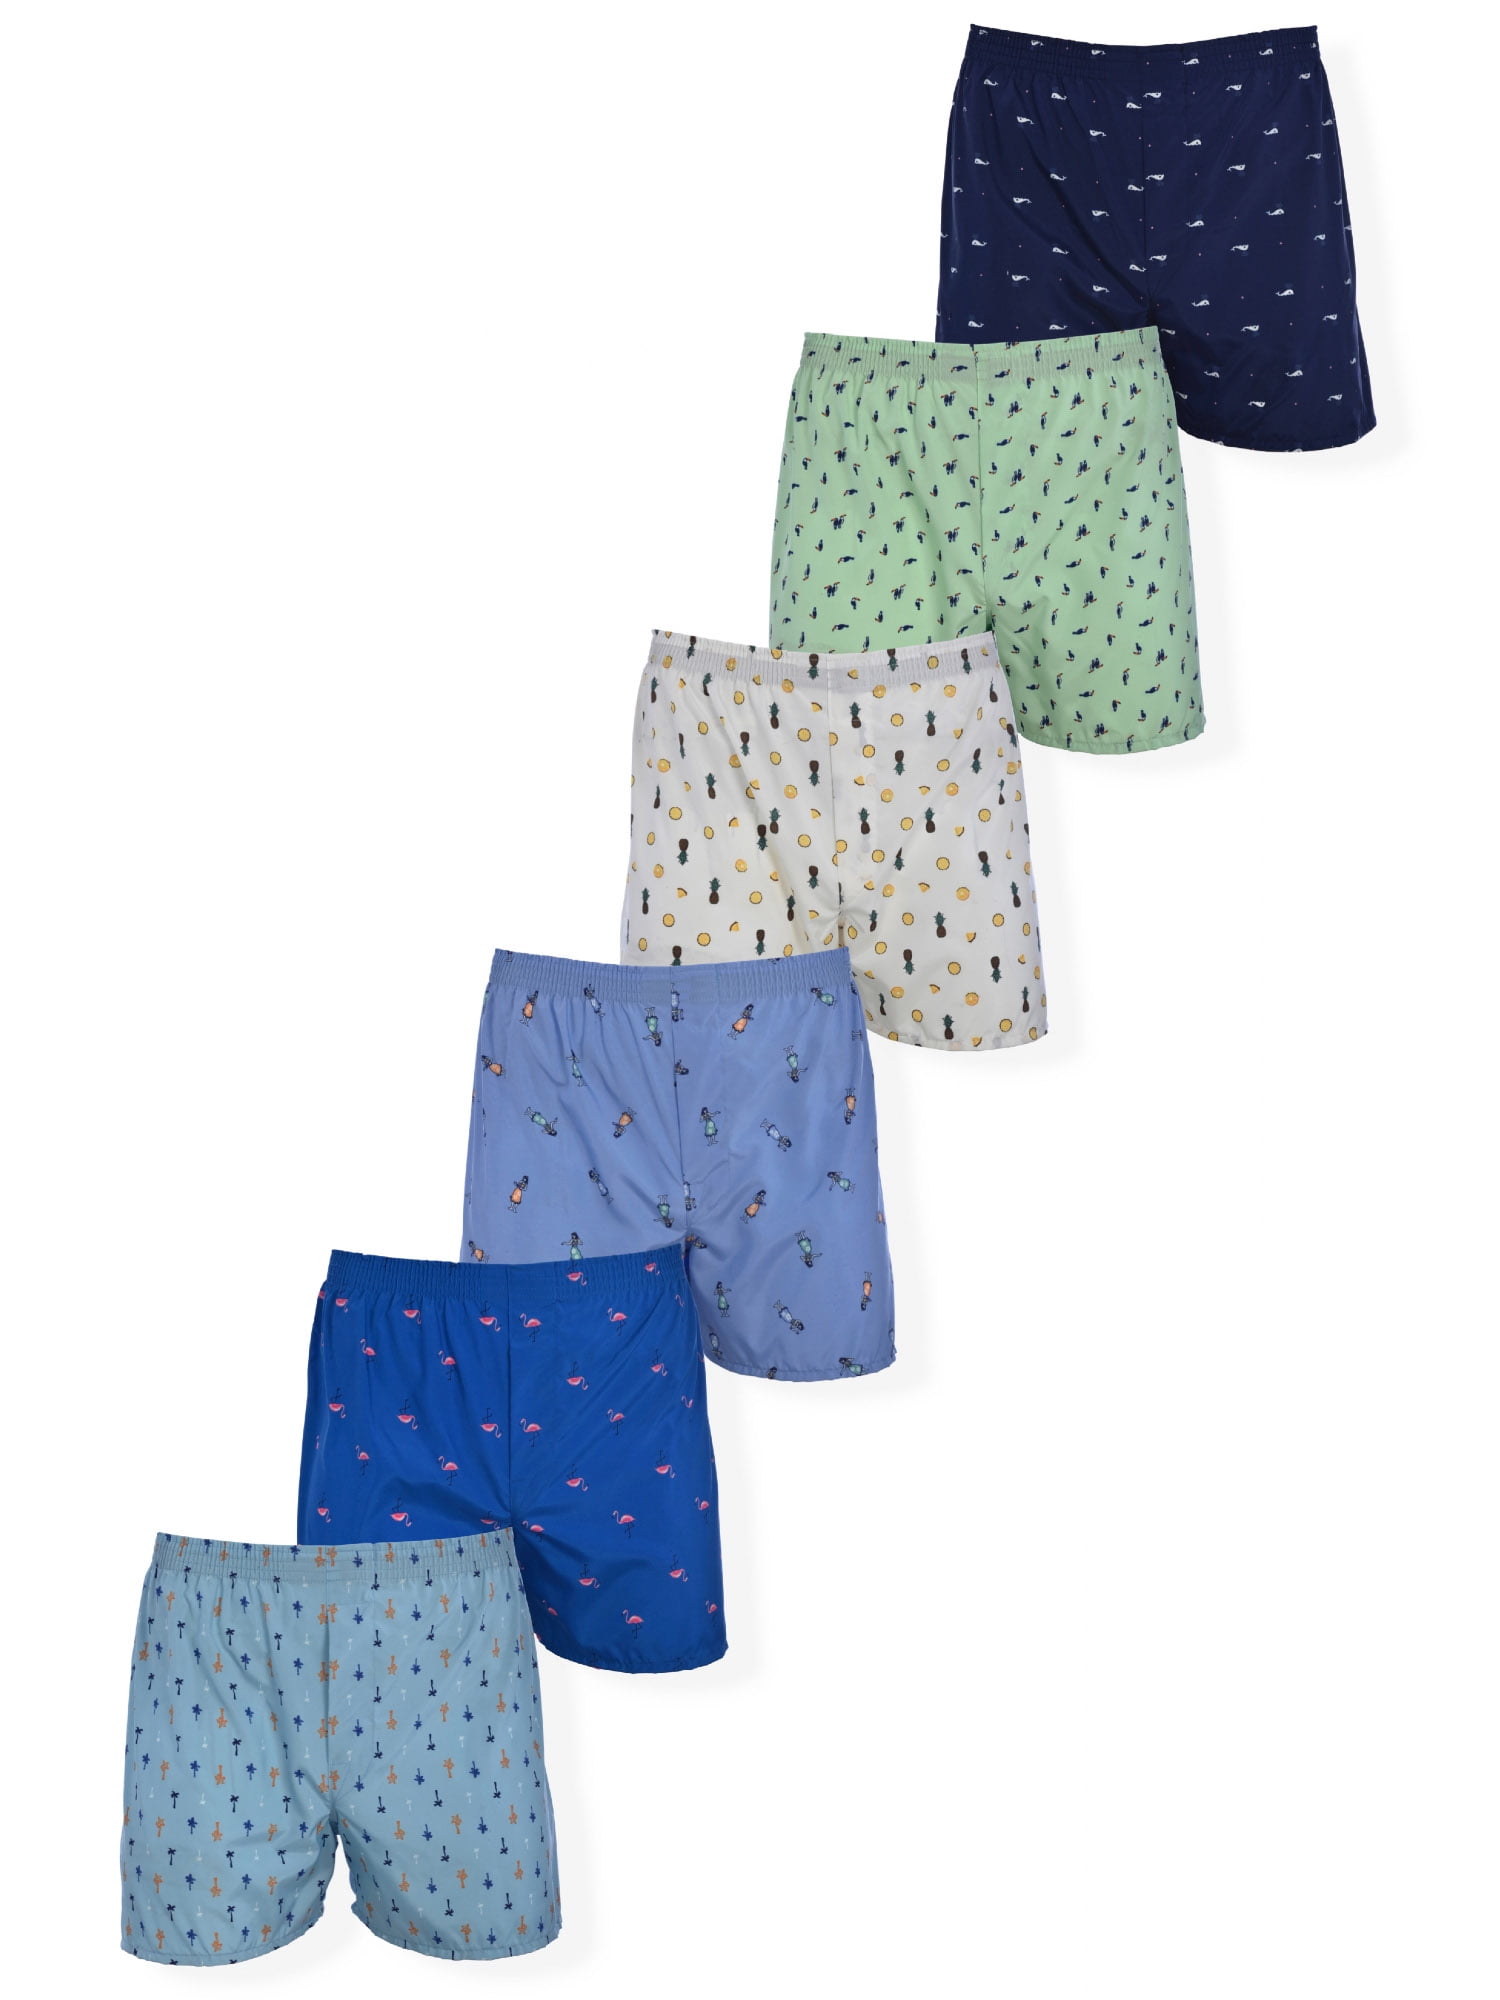 George Men's Assorted Print Boxers, 6-Pack 